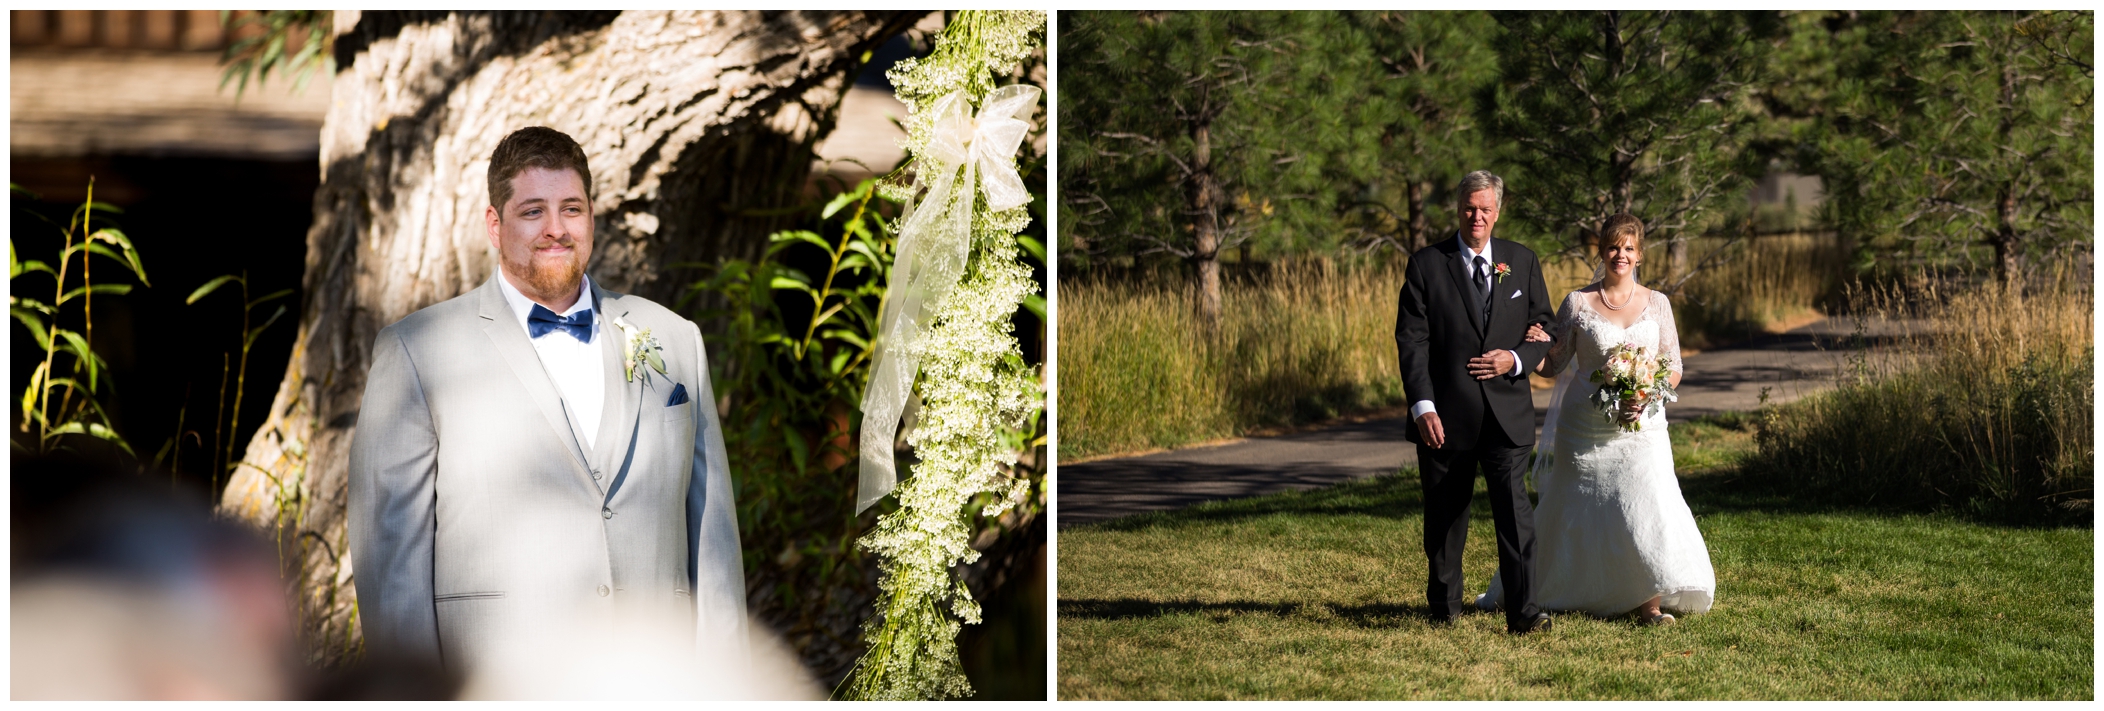 bride walking down the aisle at Spruce Mountain Ranch